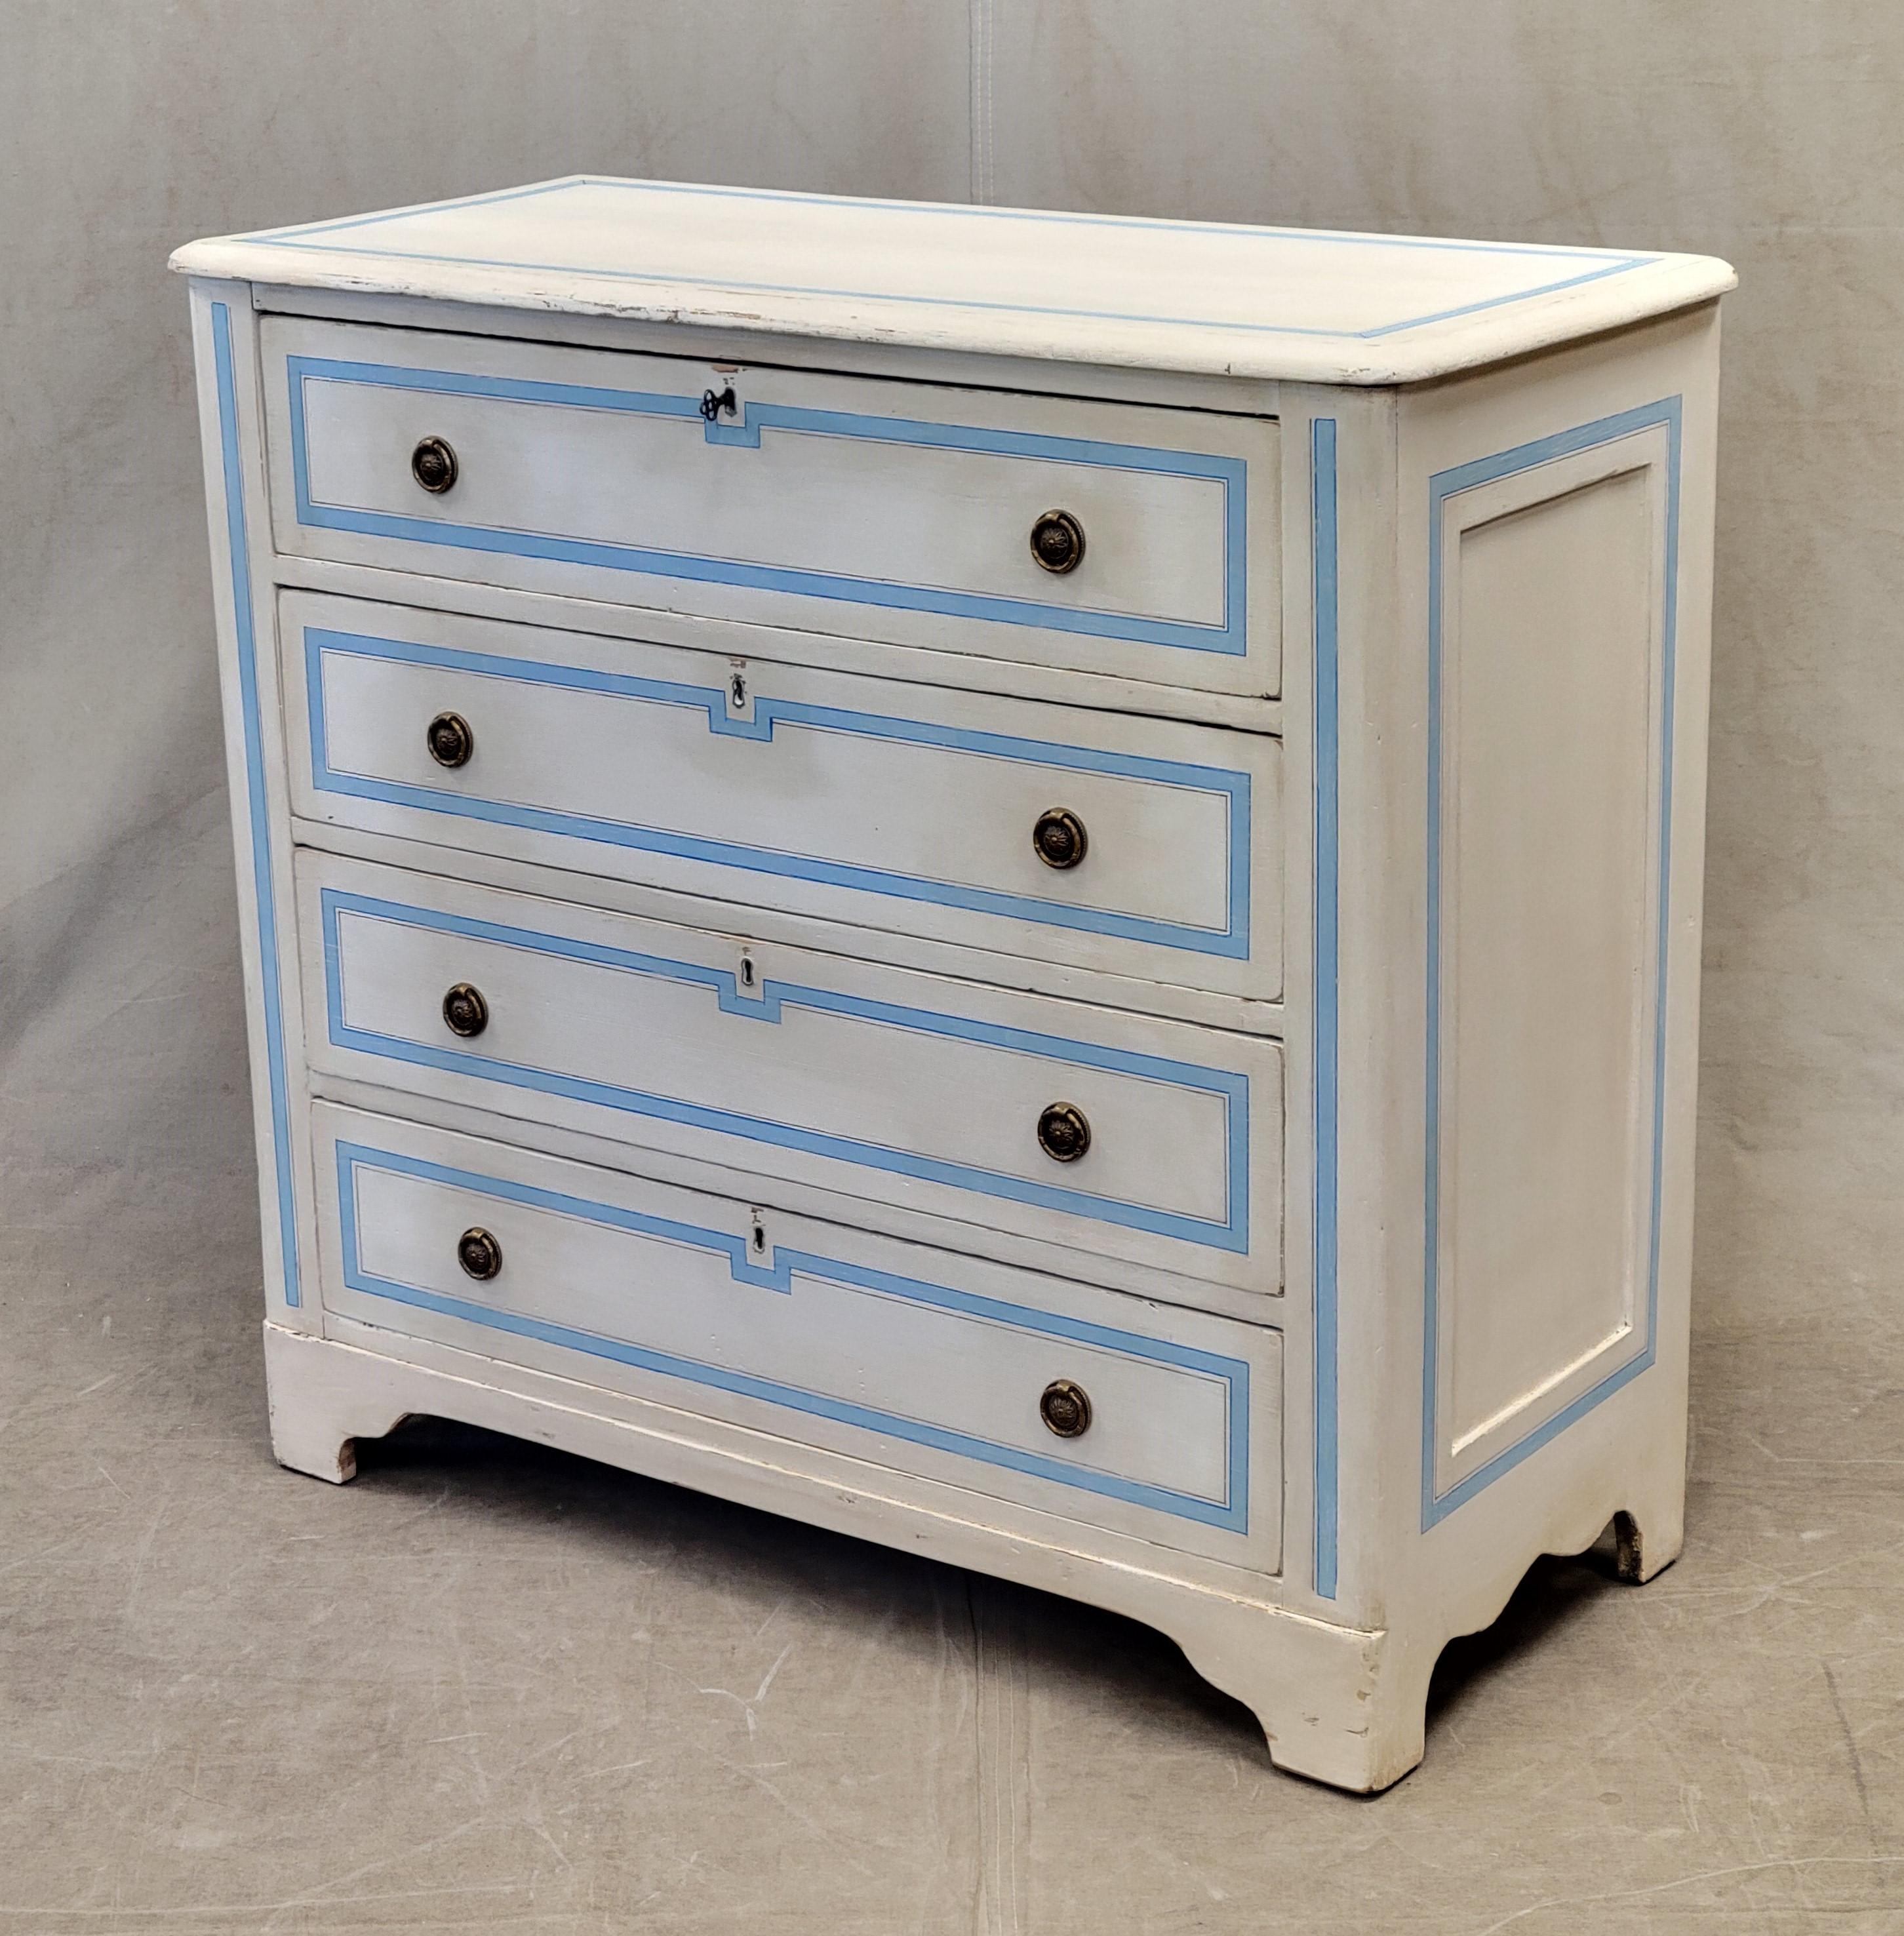 An elegant and functional antique pine dresser with bracket feet, painted white and accented in a blue French line motif. Brass pull rings add to the elegance of this piece. The key works in top and third drawer.
Antique pine dresser is stable and